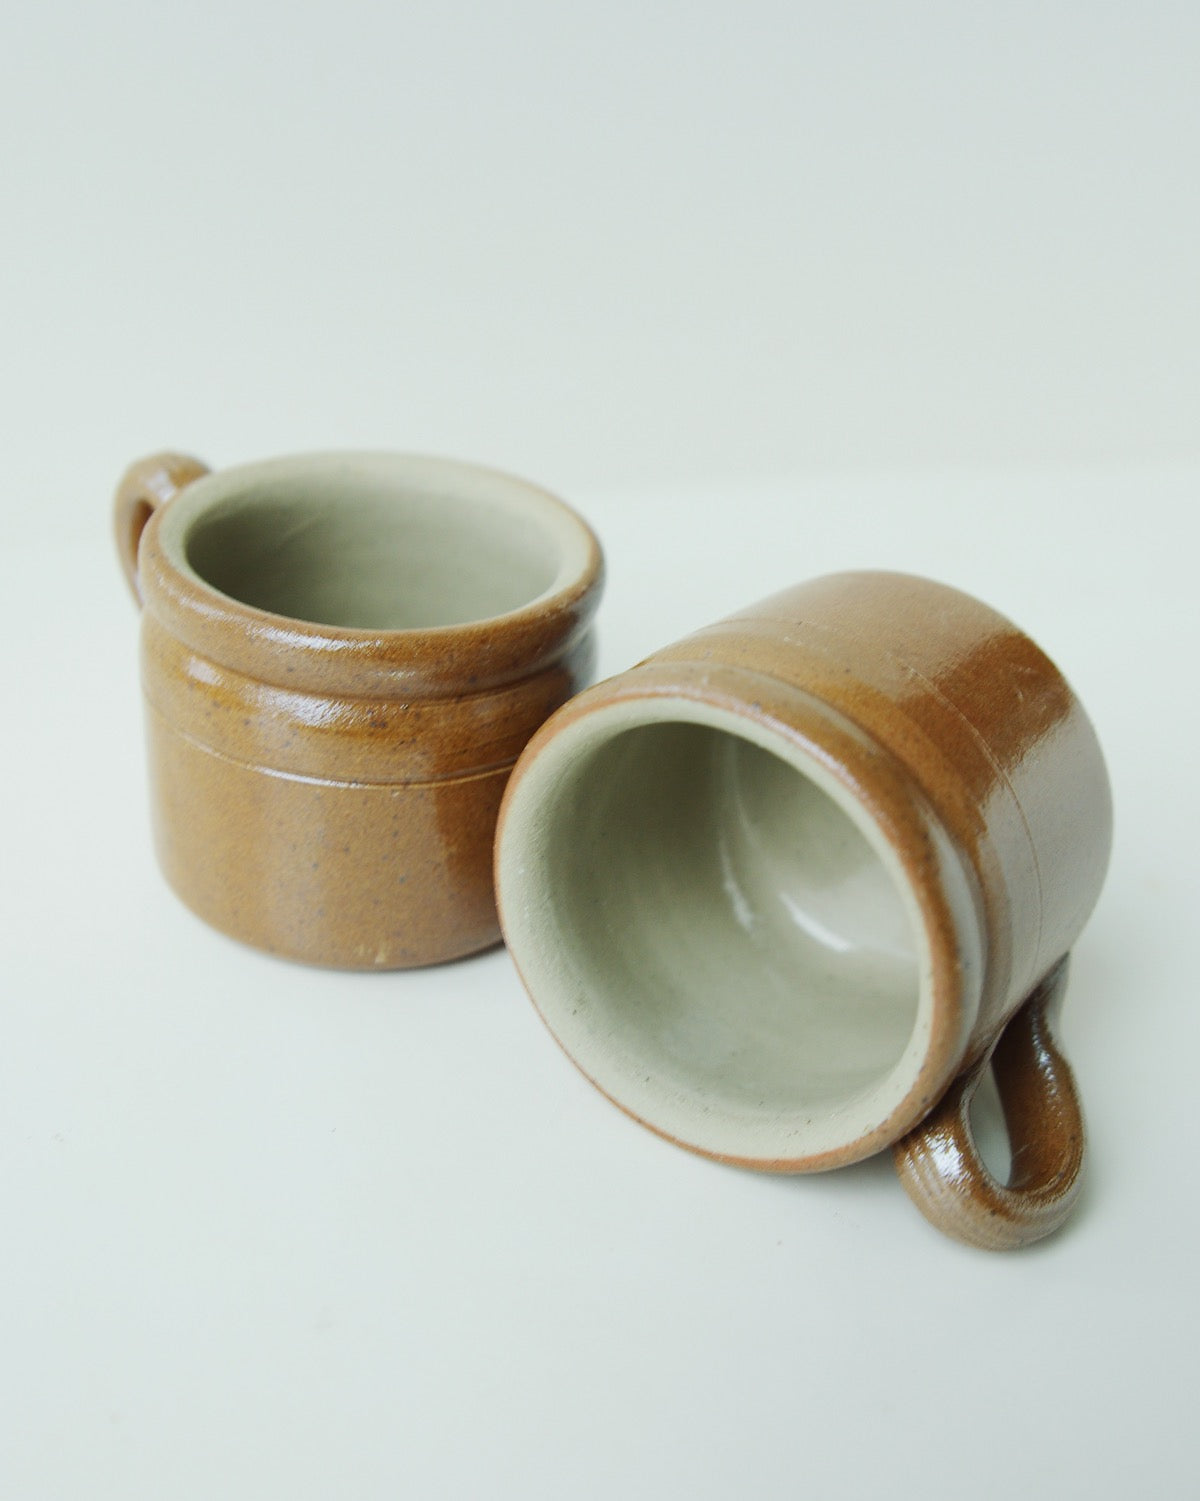 Two ceramic mugs with handles, one standing upright and the other tipped on its side, showcasing their glazed interior. 